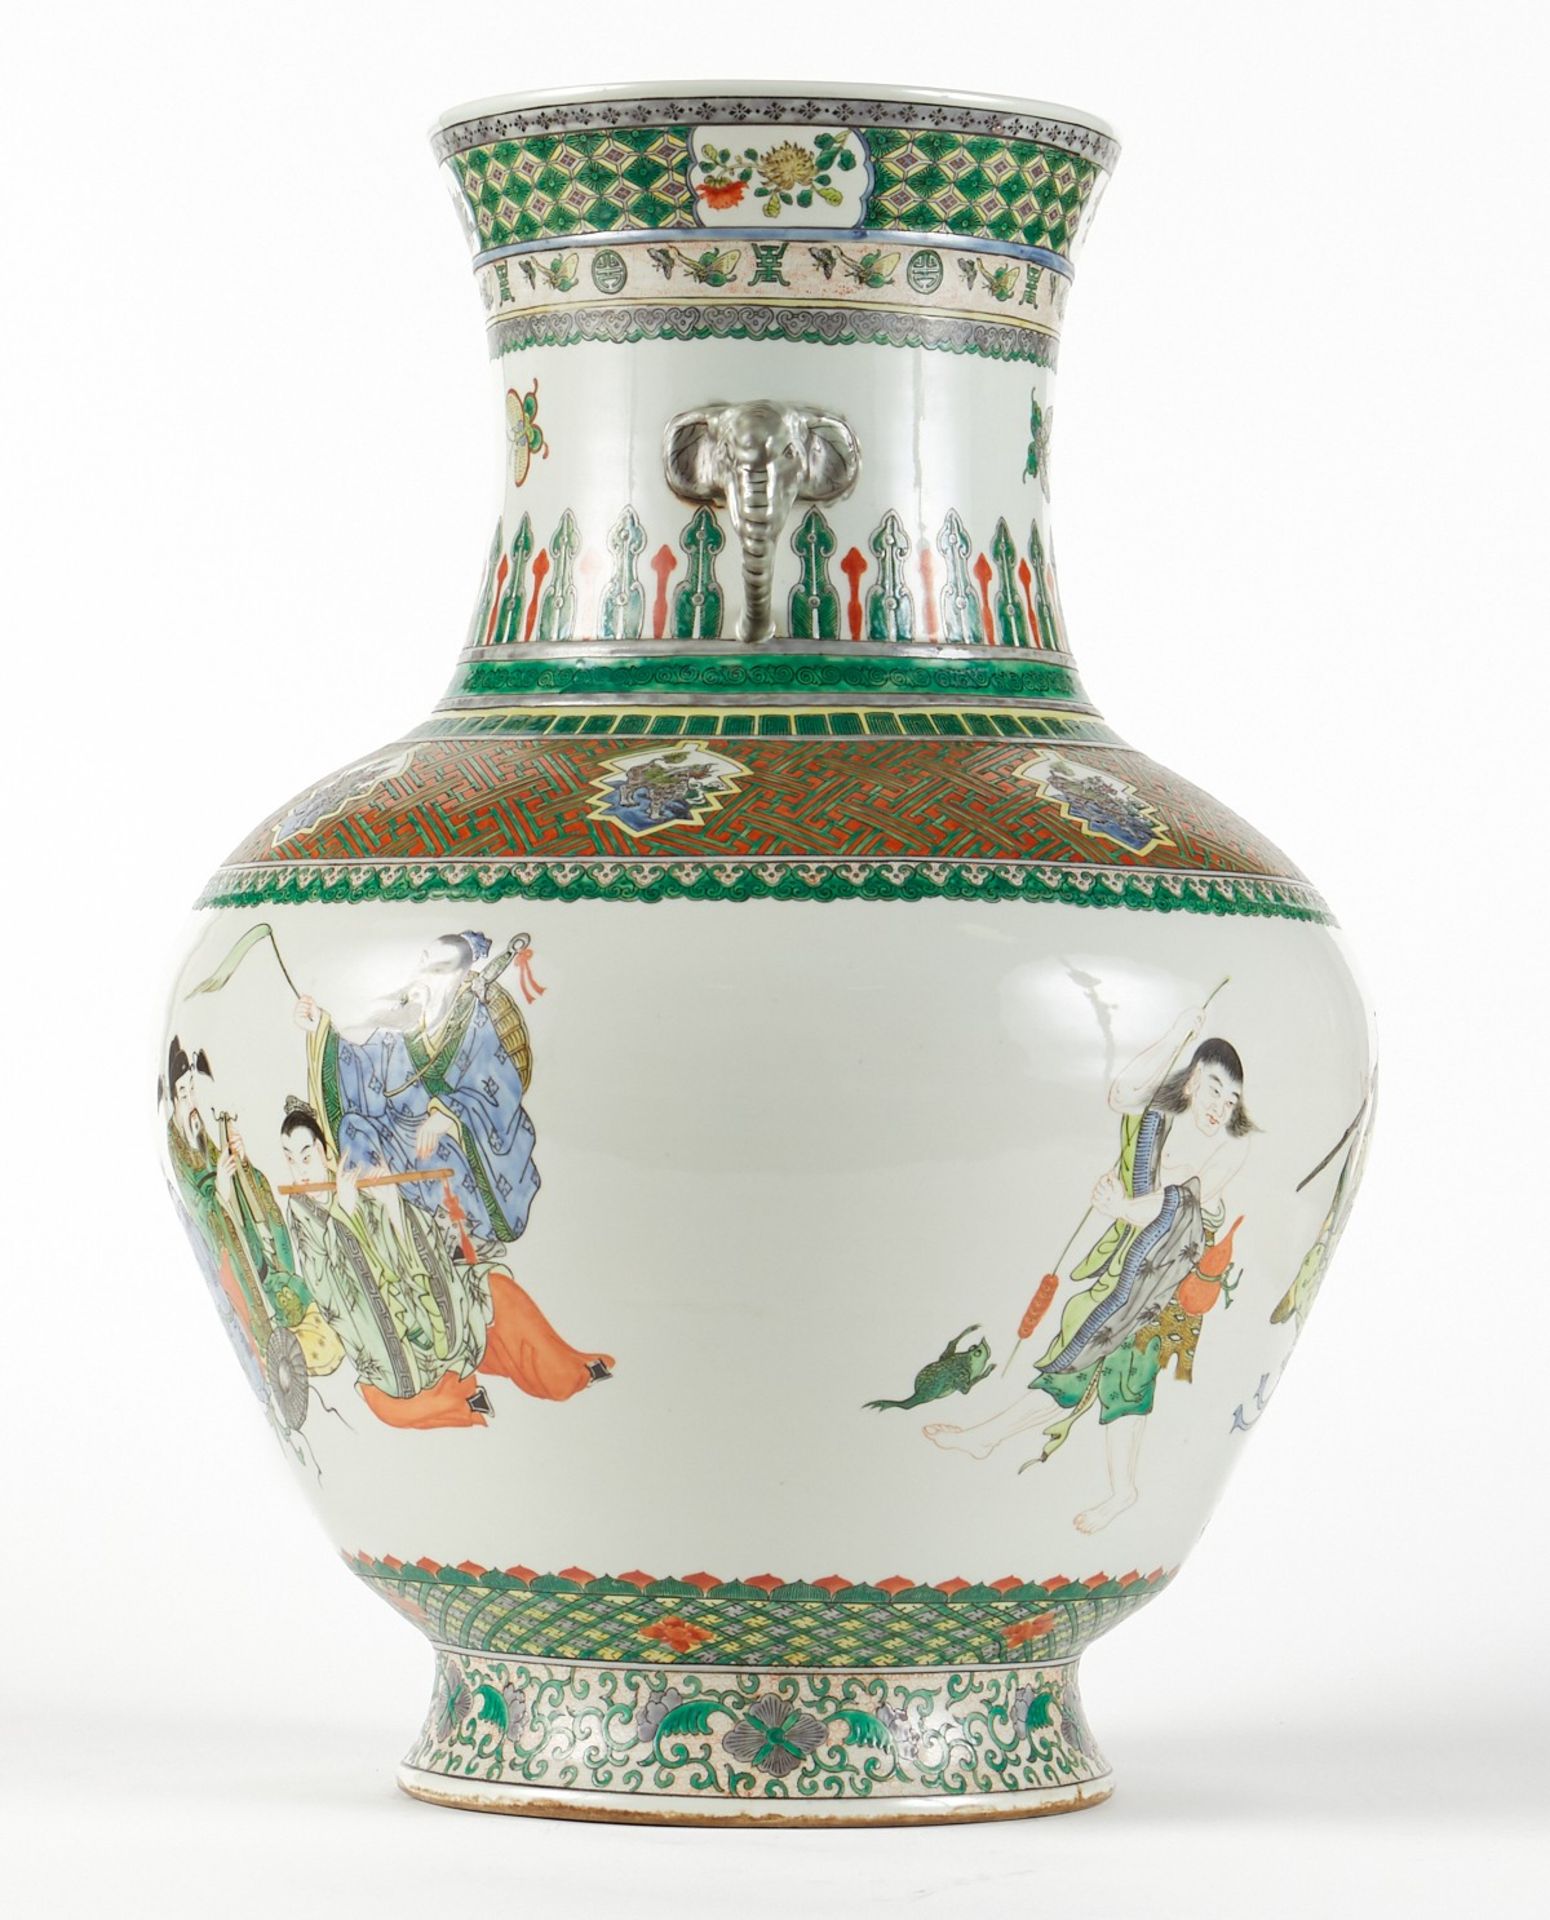 Enormous Chinese Famille Verte Vase - Image 5 of 11